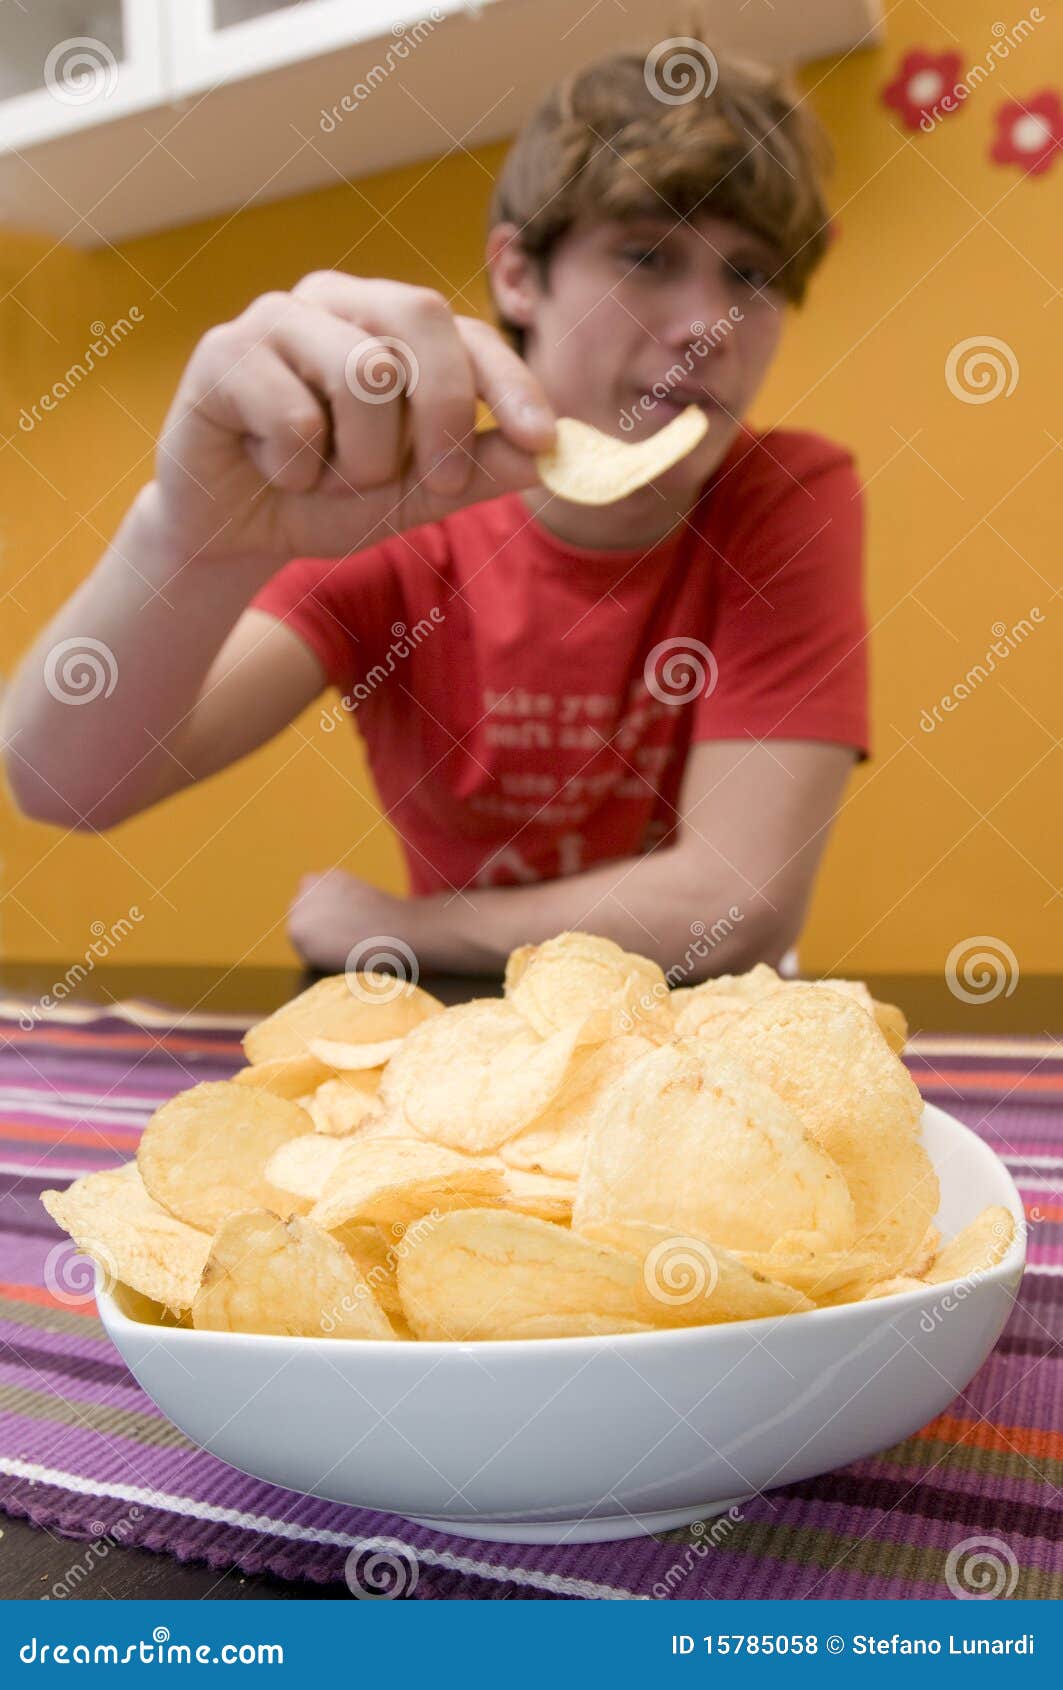 Eating Chips Royalty Free Stock Photos - Image: 15785058